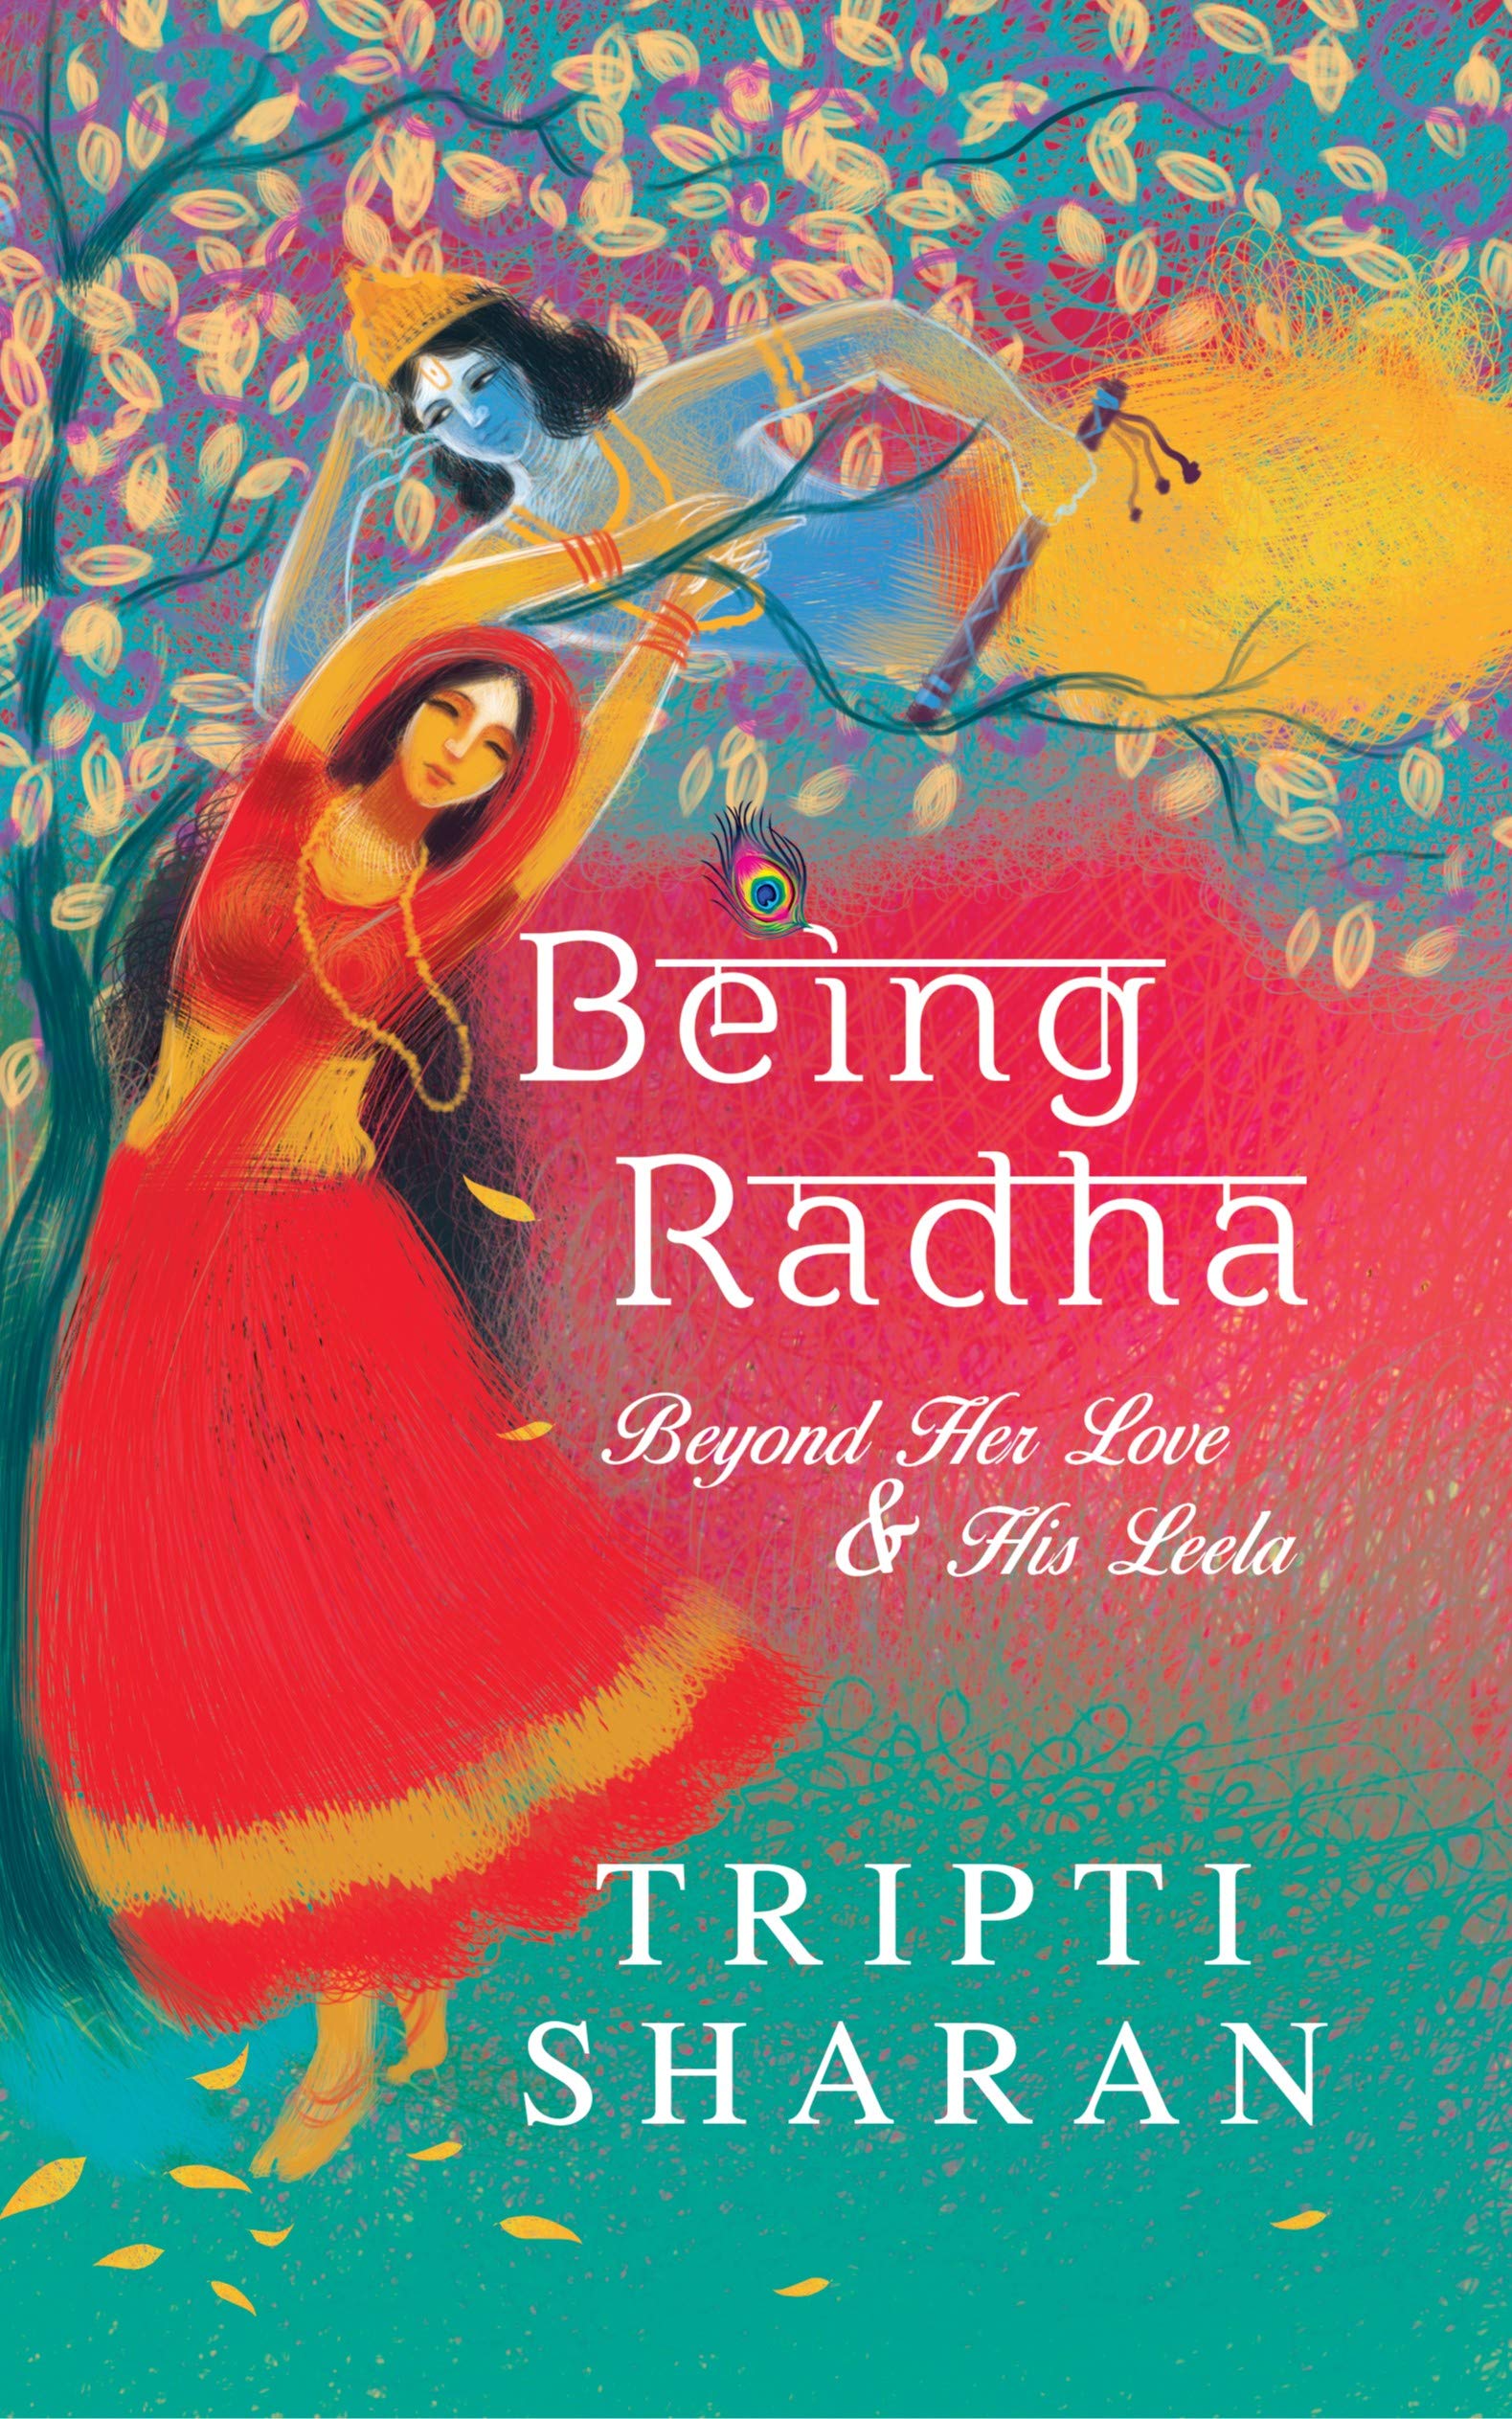 Why Being Radha Is Not The Same As Being Any Other Goddess In Our Mythologies